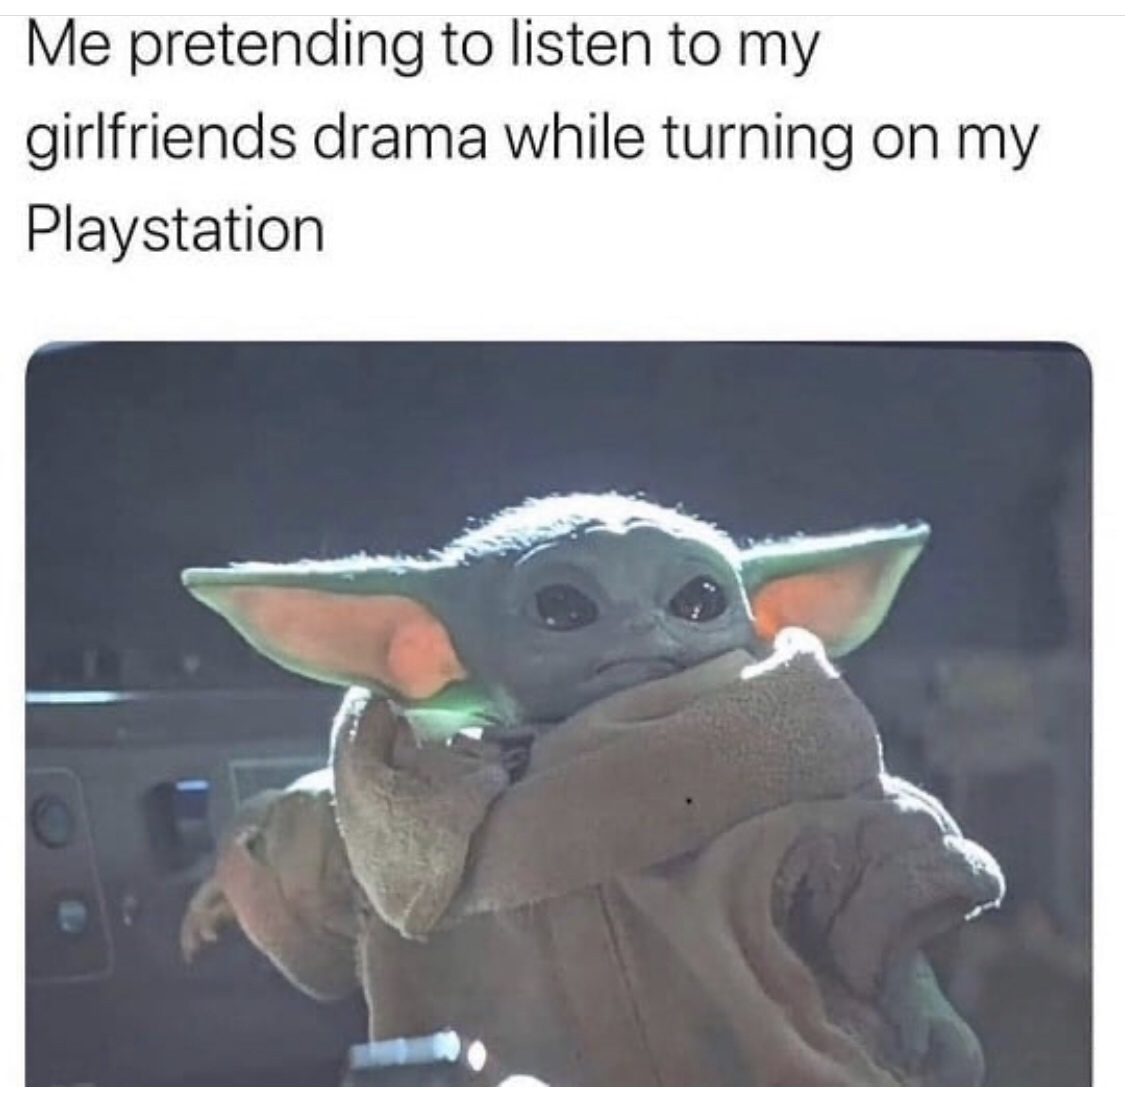 me pretending to listen to my girlfriend - Me pretending to listen to my girlfriends drama while turning on my Playstation